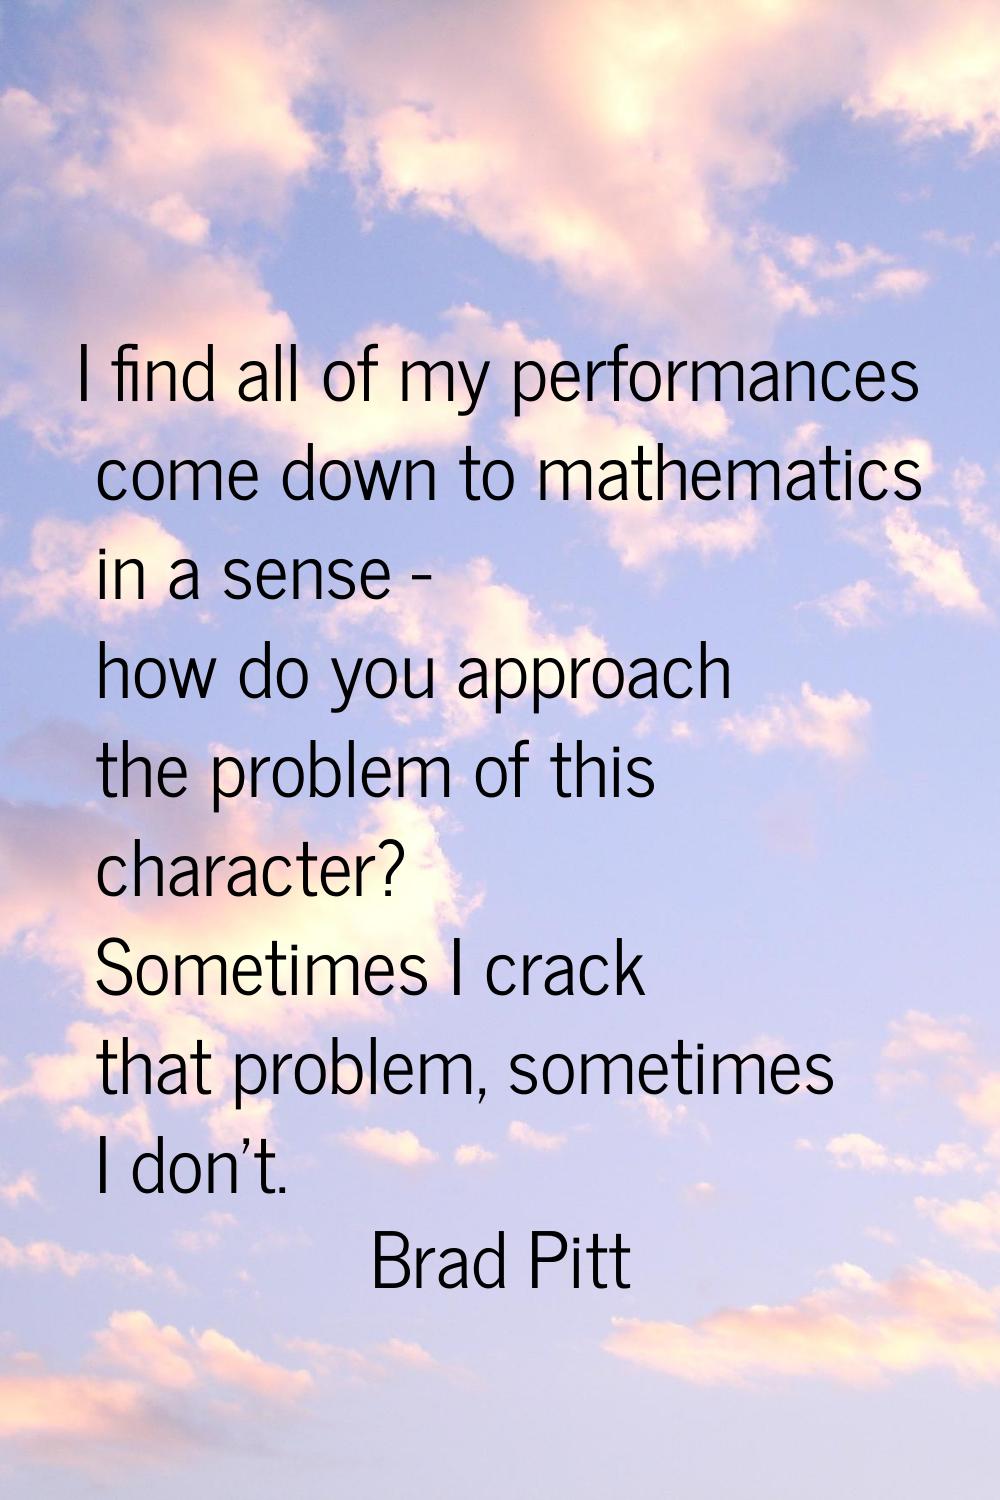 I find all of my performances come down to mathematics in a sense - how do you approach the problem